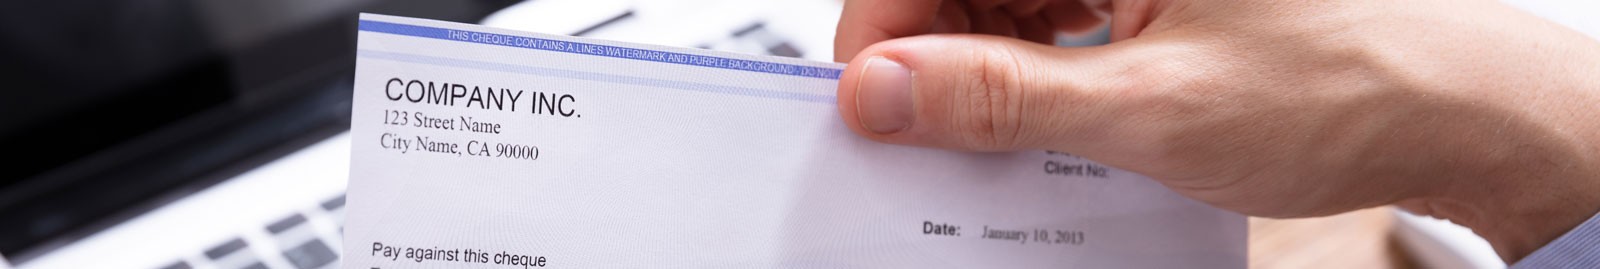 Image of hand removing paycheck from envelope.